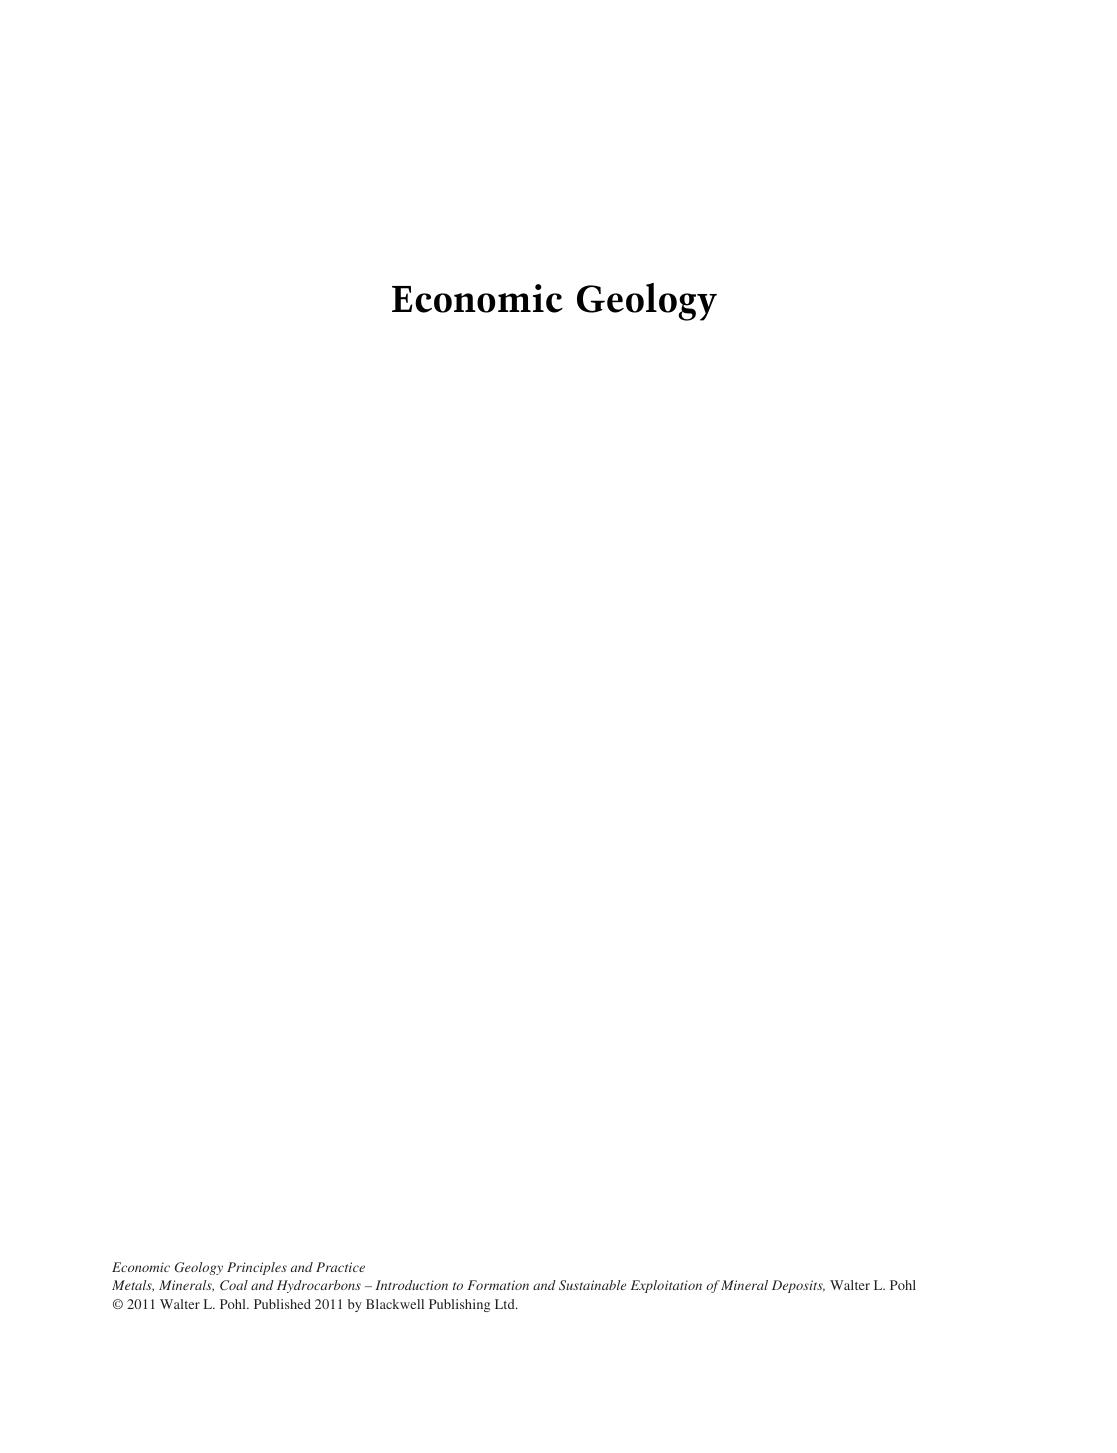 Economic Geology Principles and Practice  Metals, Minerals, Coal and Hydrocarbons